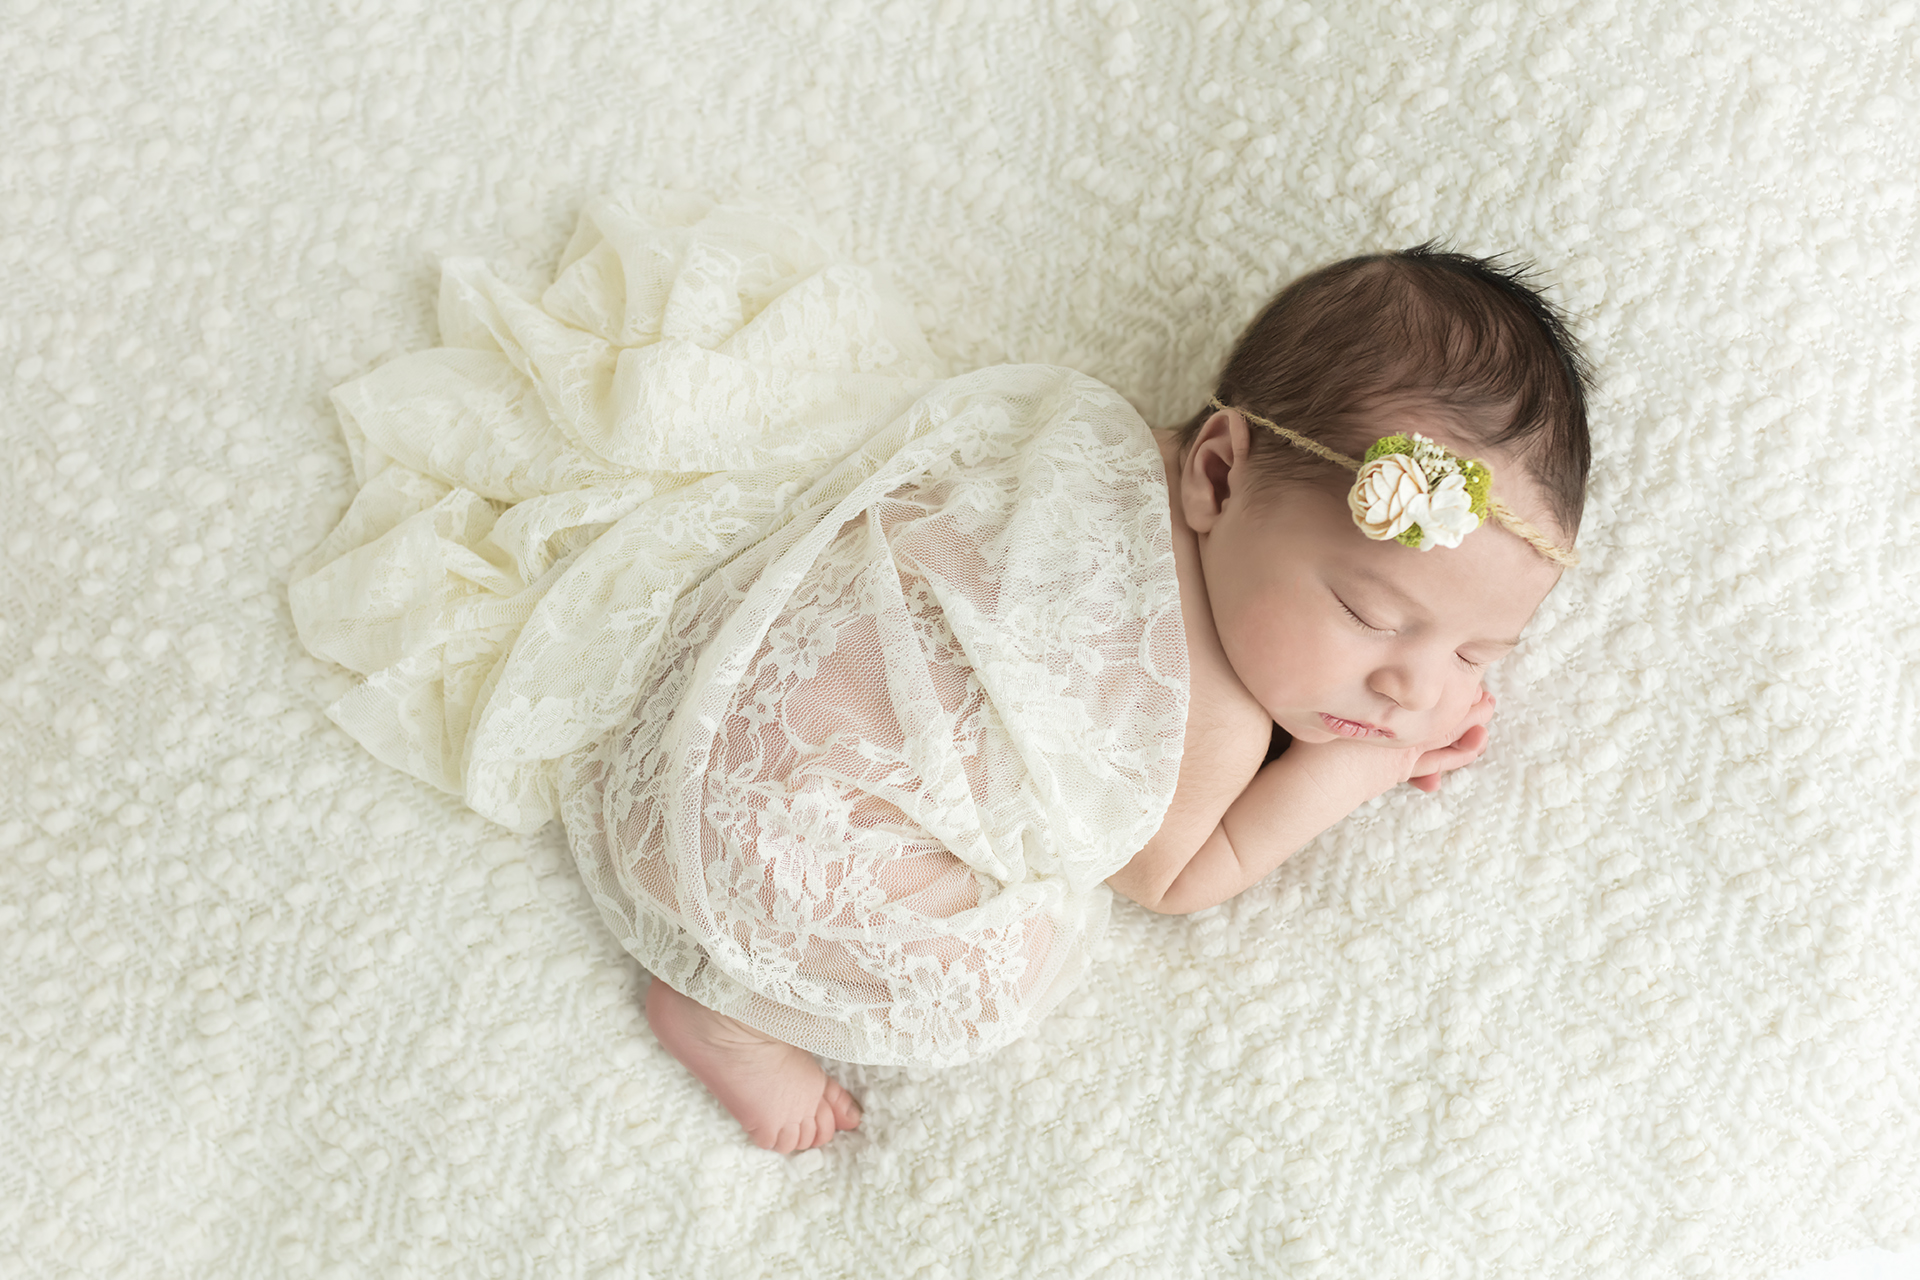 Sleeping baby girl posed wrapped in cream lace on cream blanket with white flower headband for newborn portrait session